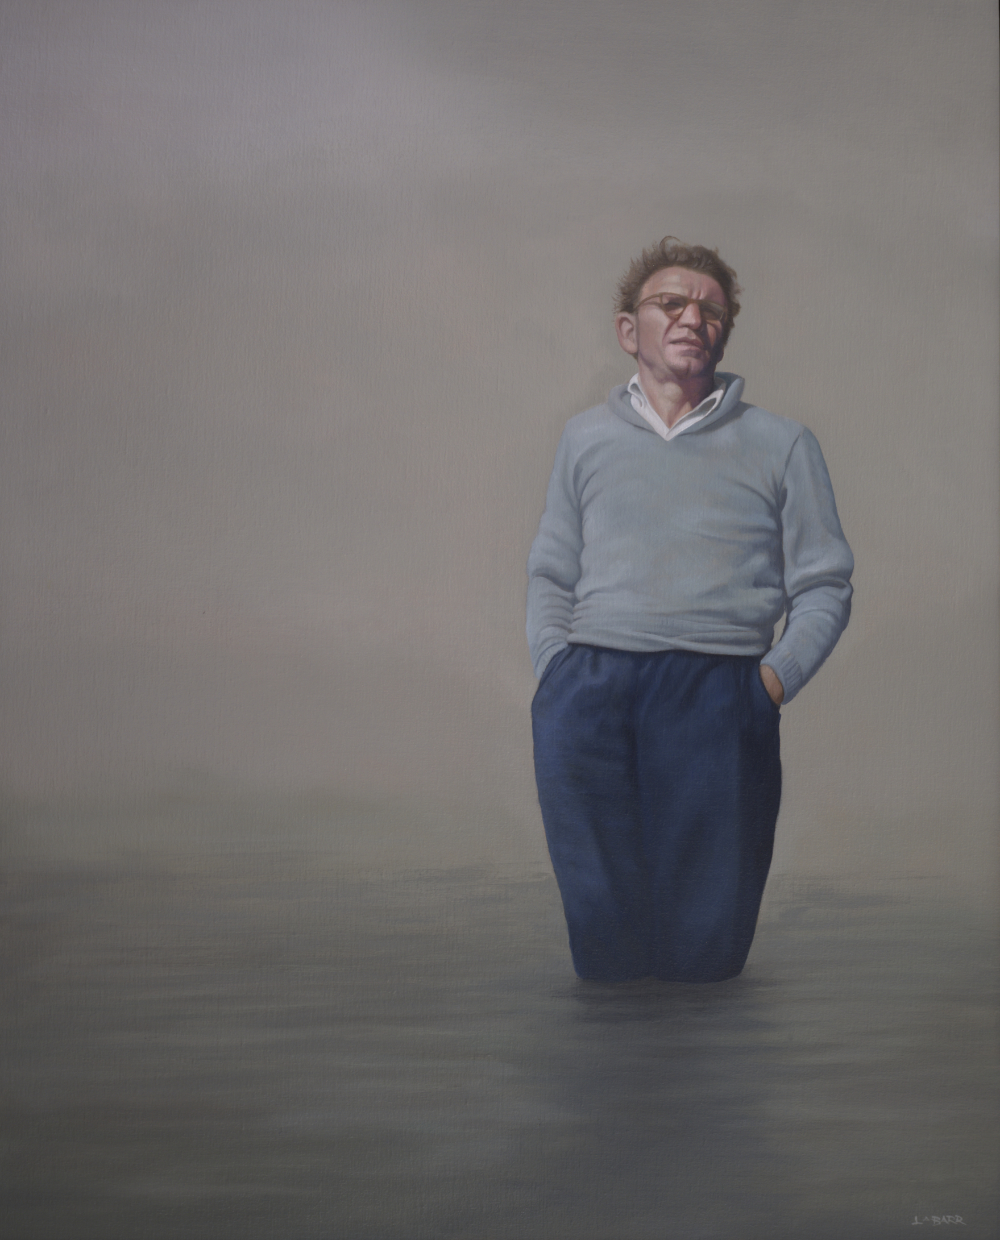 Painting of a man standing in water.